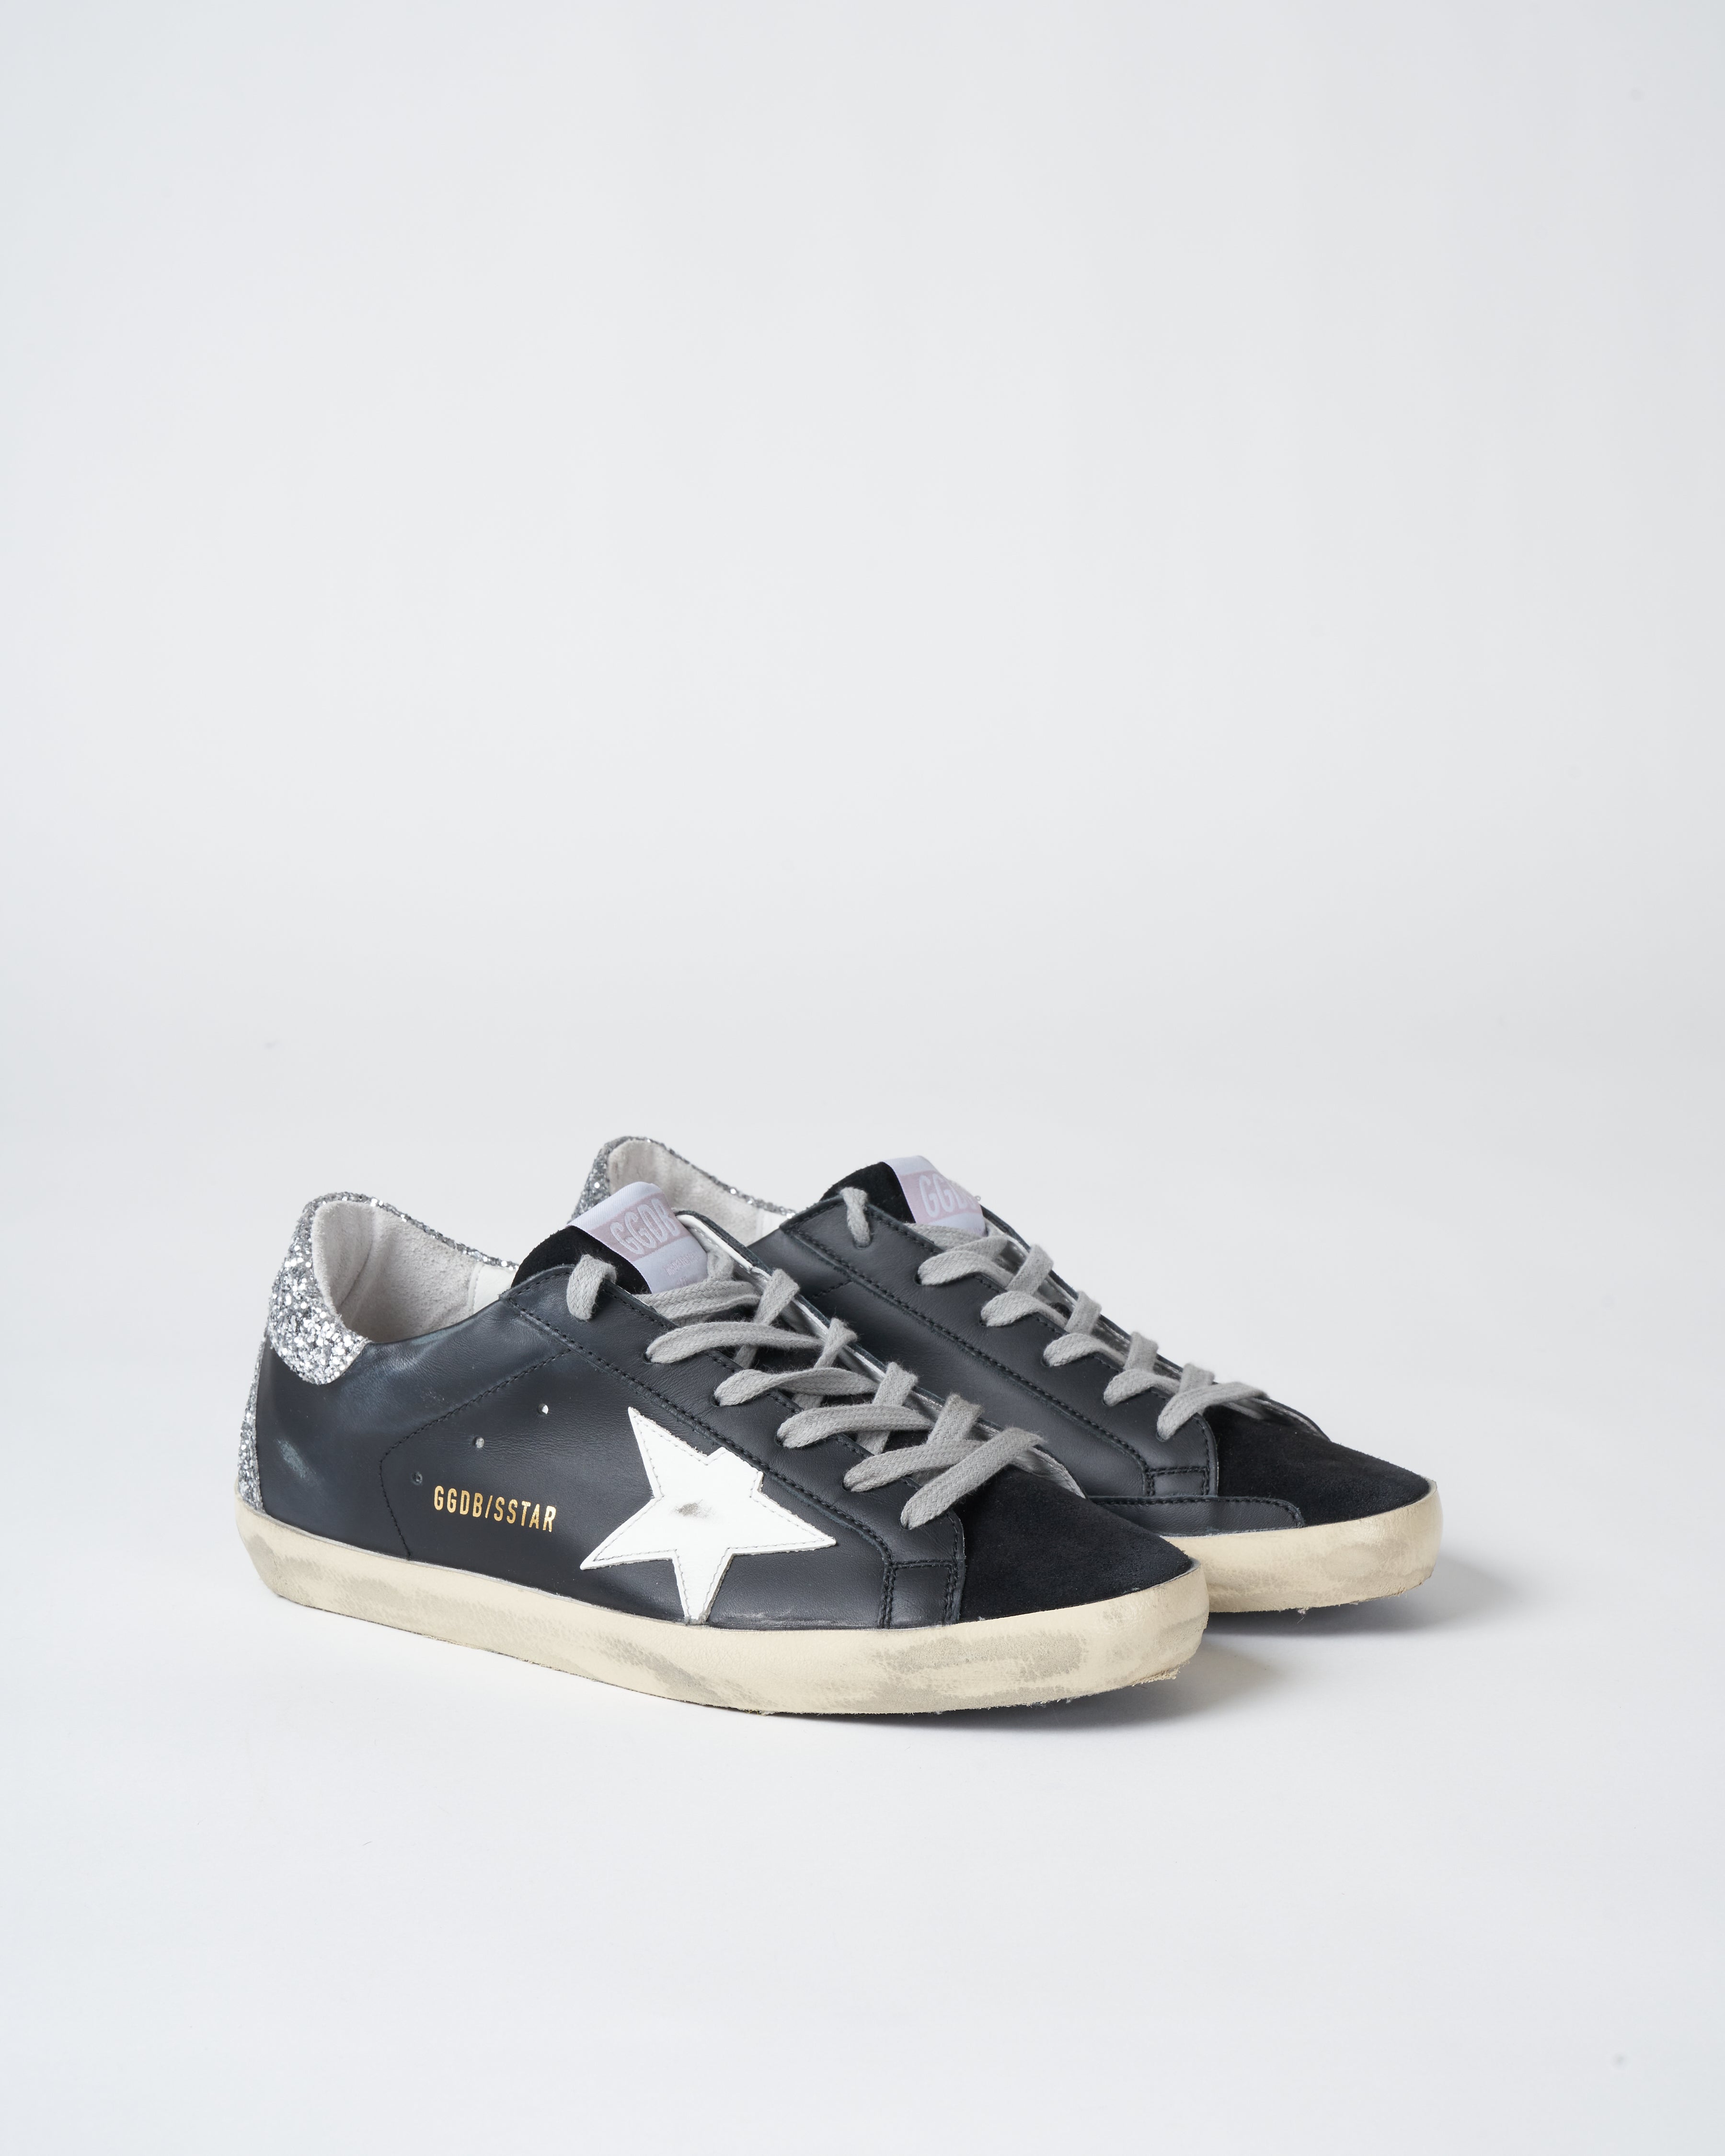 Golden Goose Super-Star Leather Upper And Suede Toe Glitter Spur Black/White/Silver